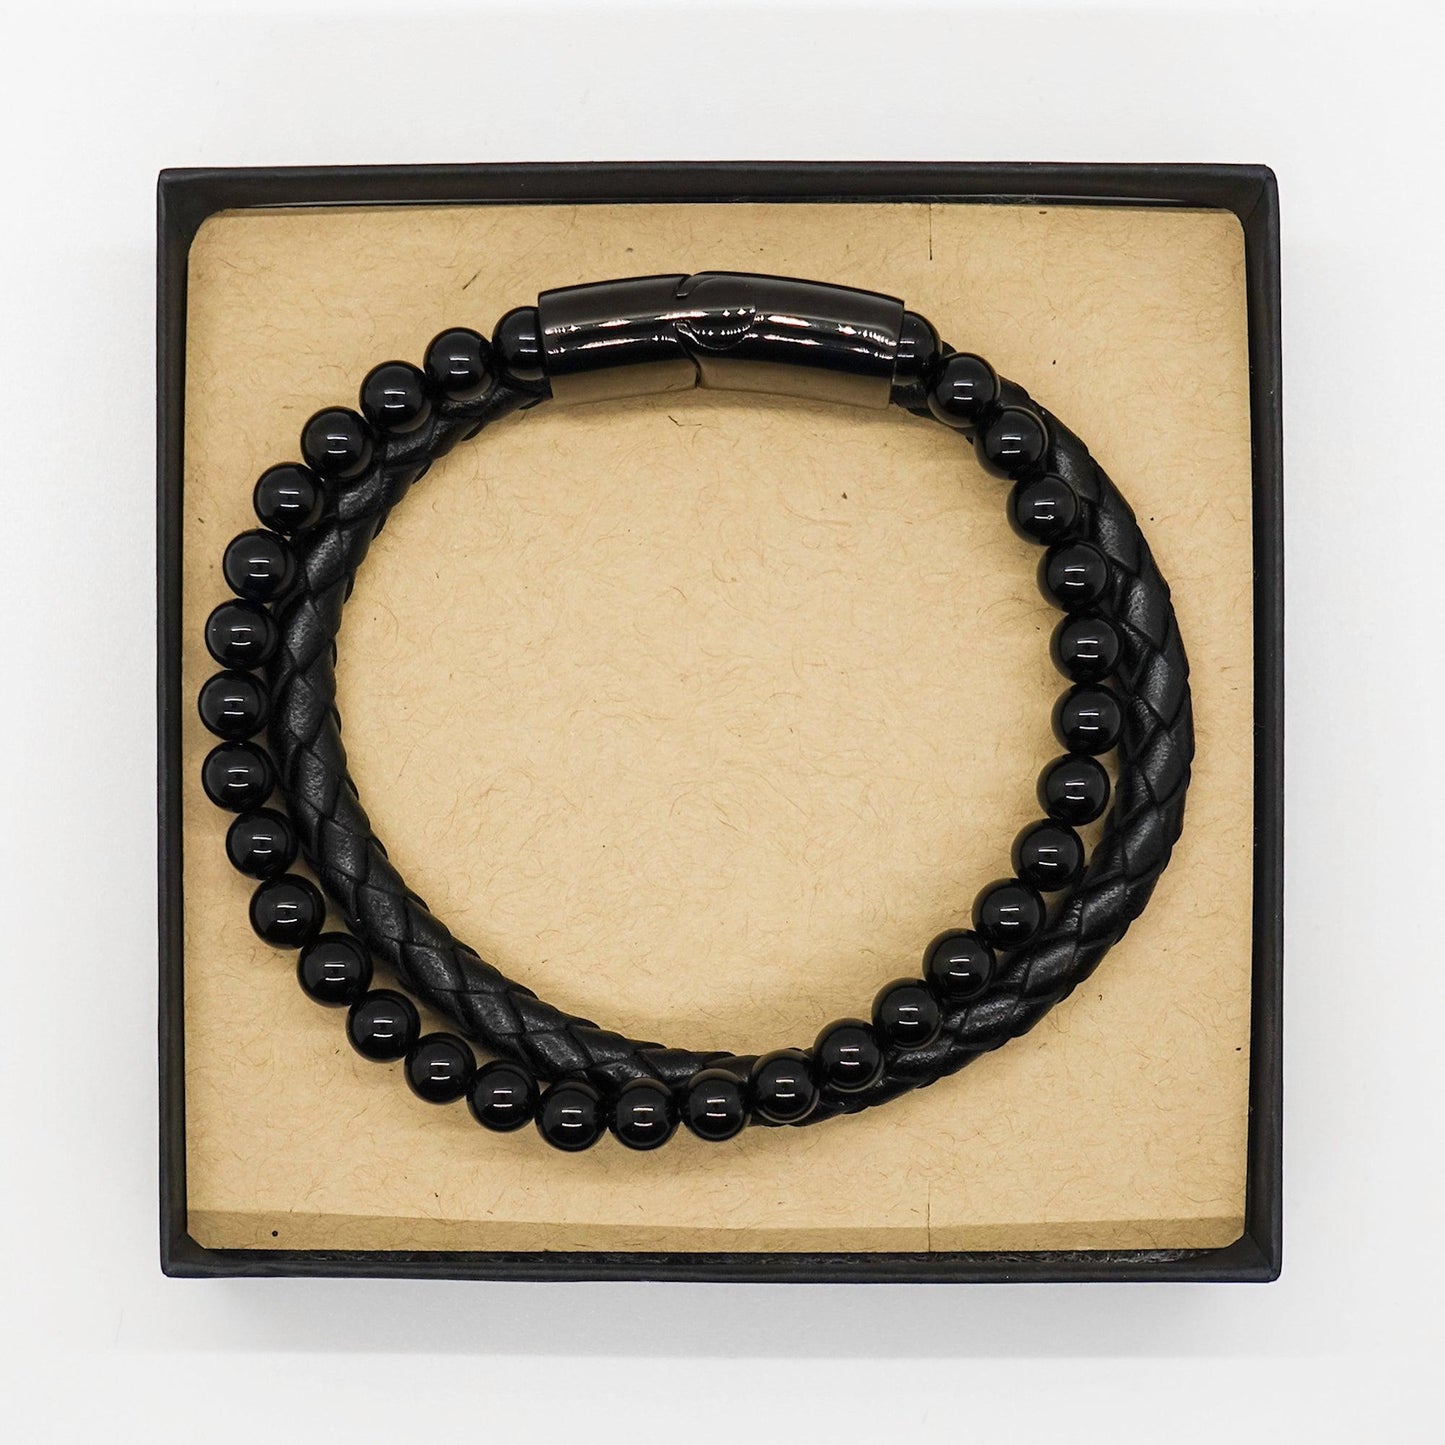 Nutritionist Black Braided Leather Stone Bracelet - Thanks for being who you are - Birthday Christmas Jewelry Gifts Coworkers Colleague Boss - Mallard Moon Gift Shop